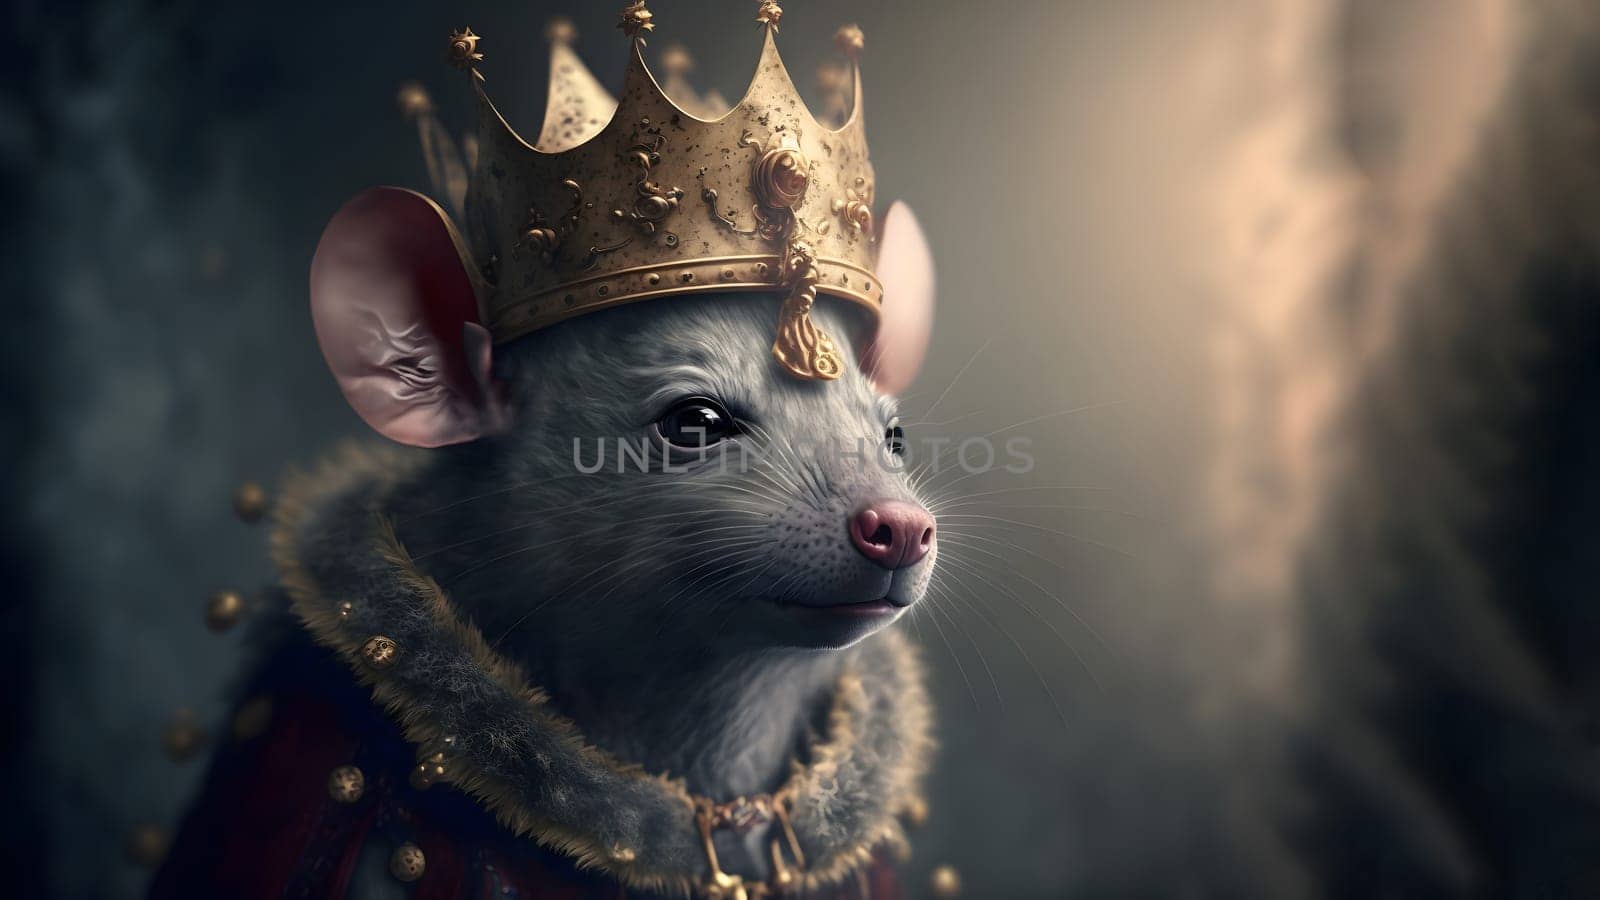 rat king medieval portrait, neural network generated art by z1b